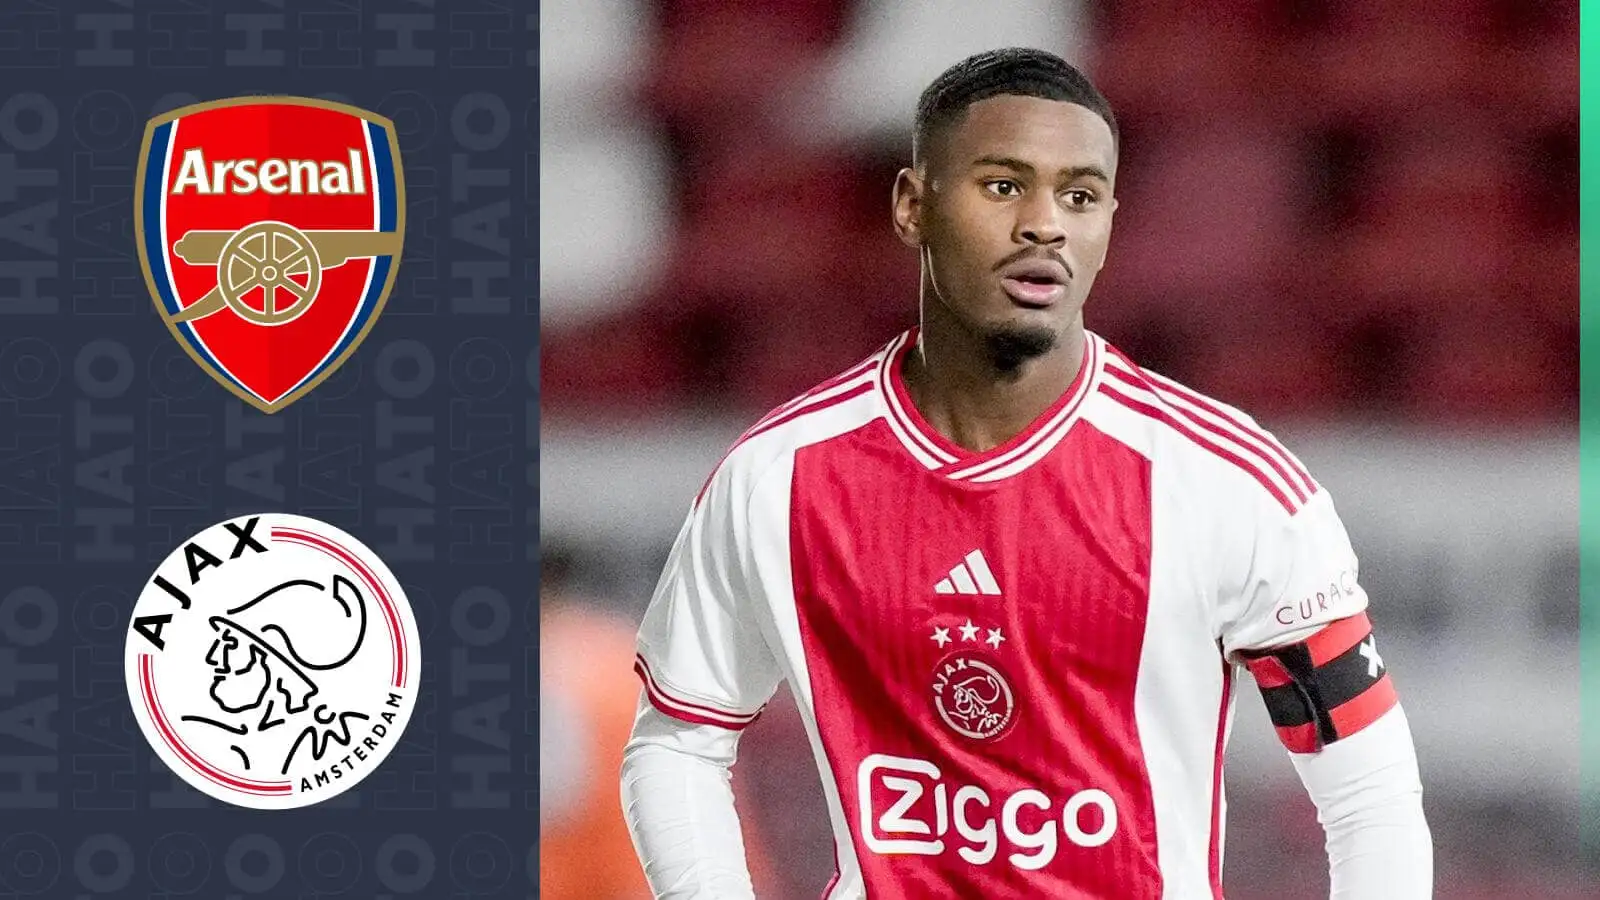 Jorrel Hato next to the Arsenal and Ajax badges